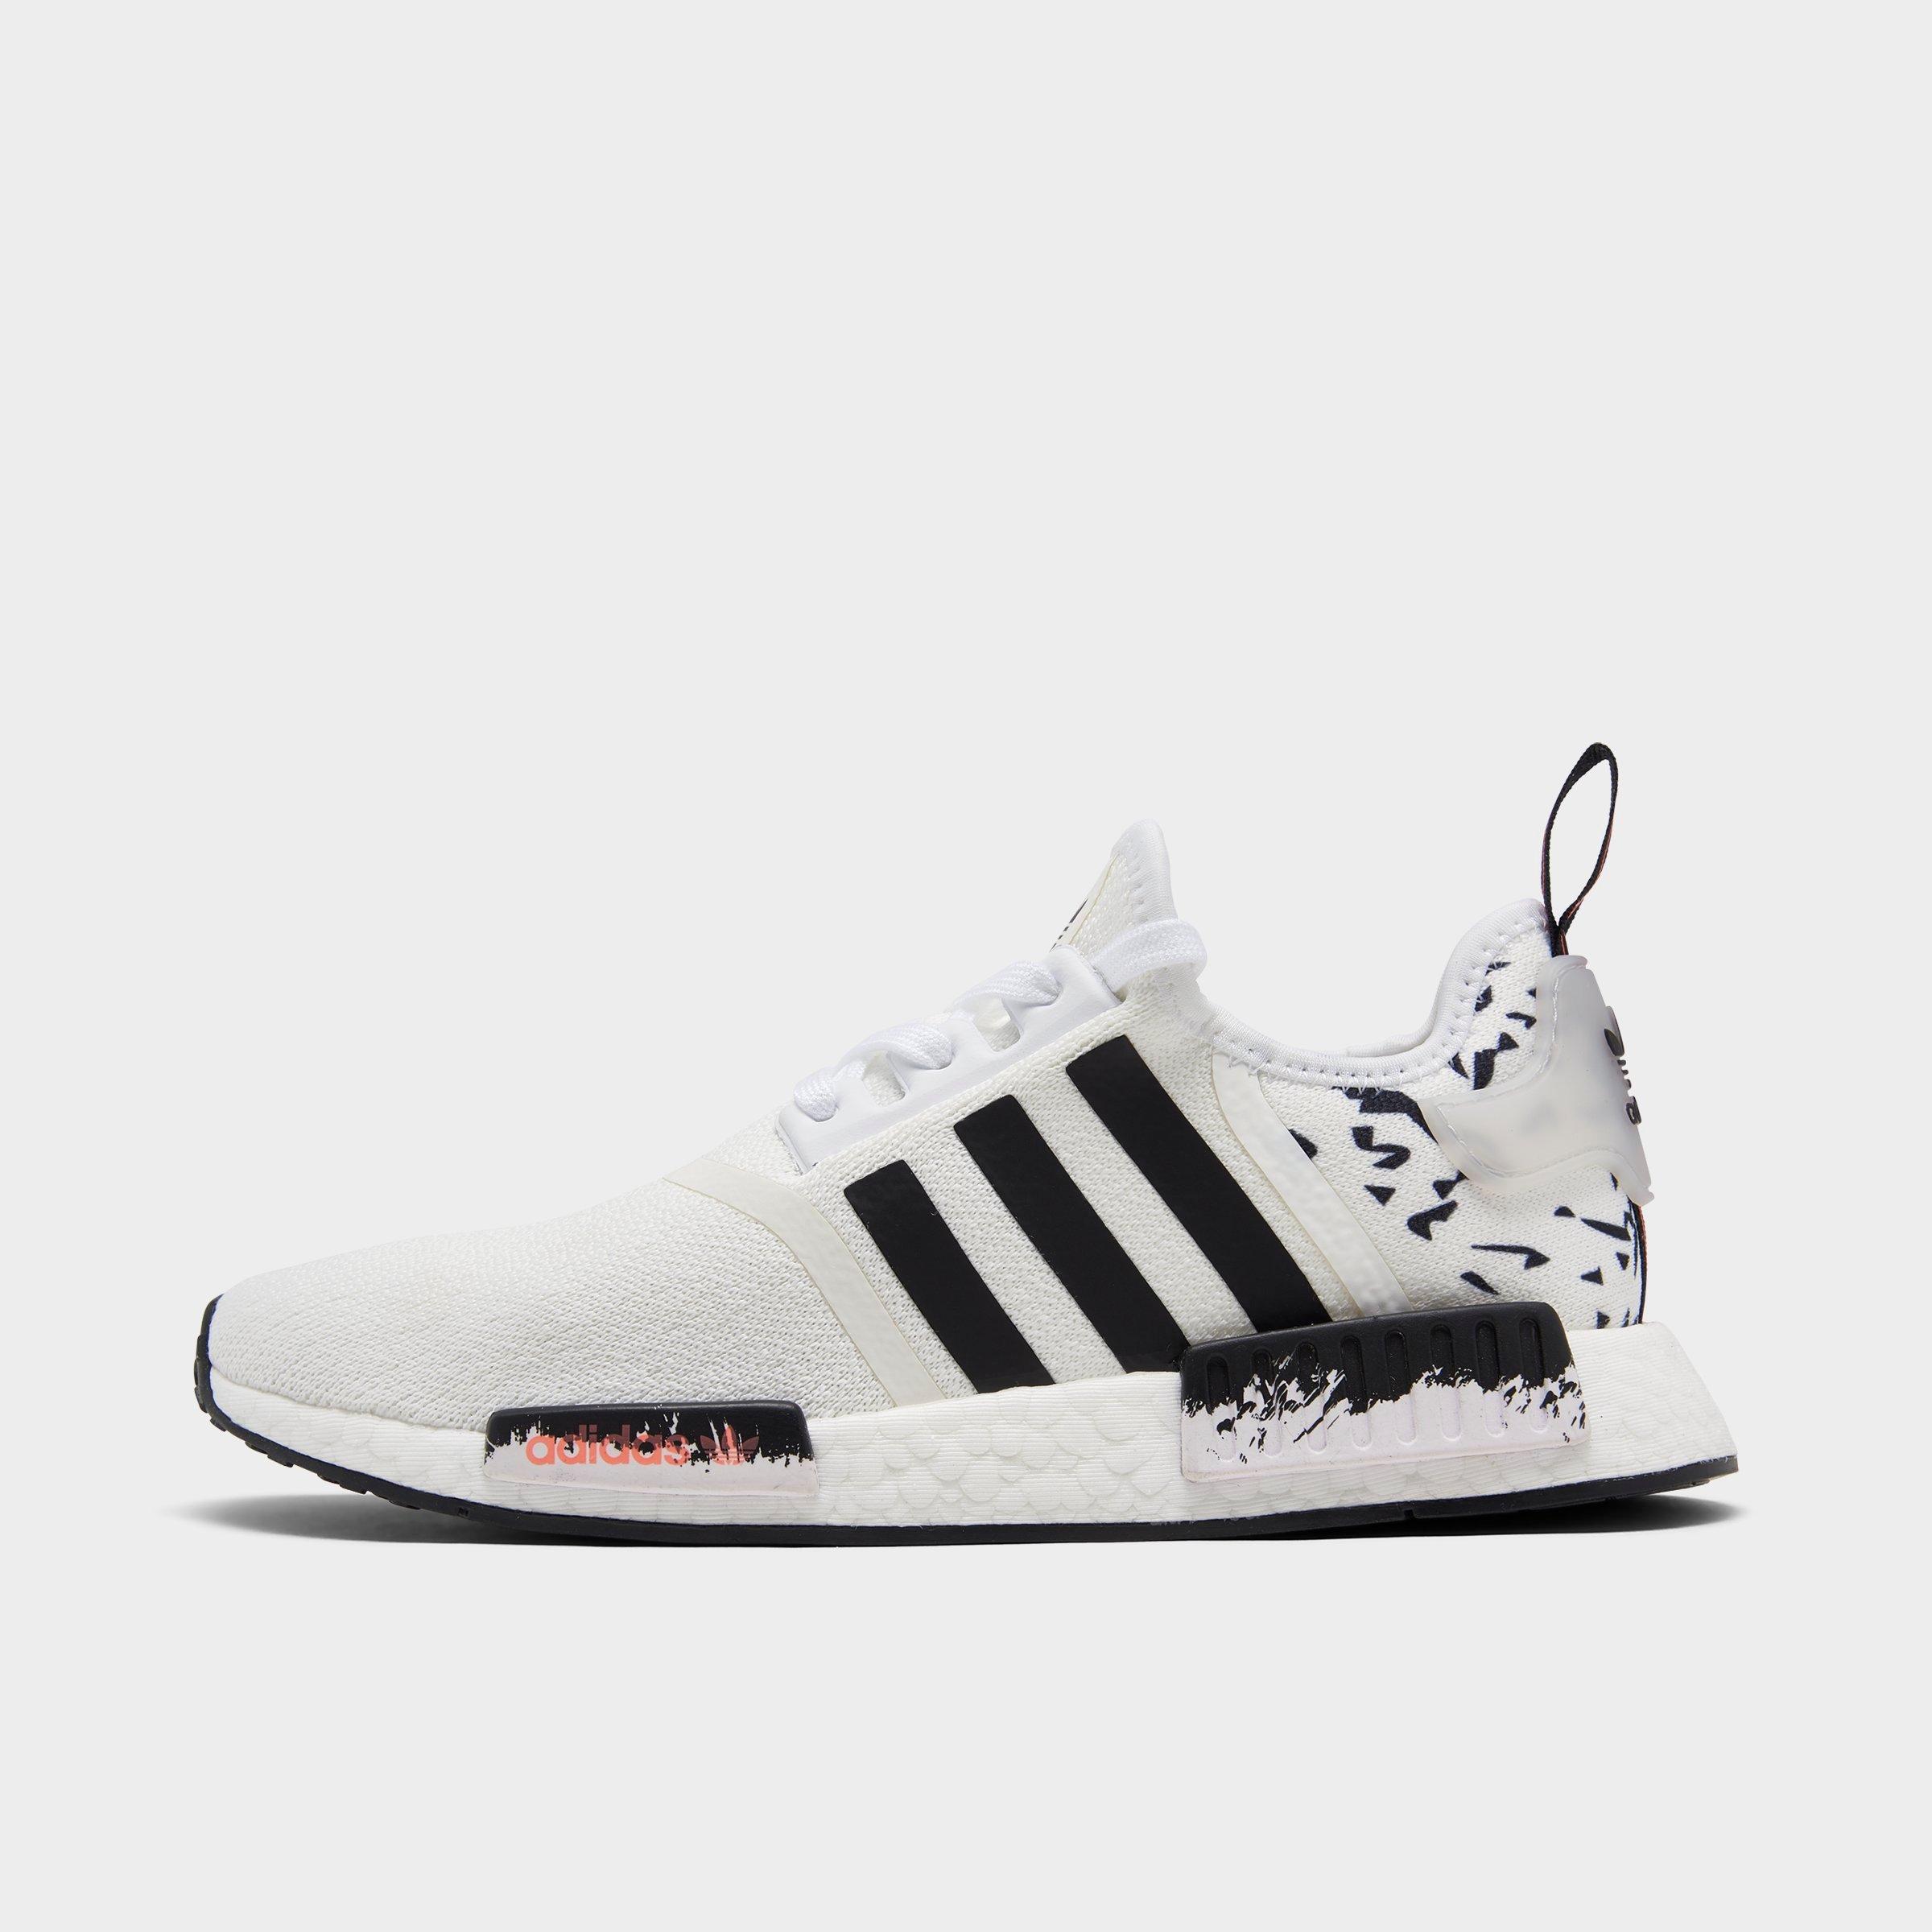 men's adidas nmd runner r1 casual shoes